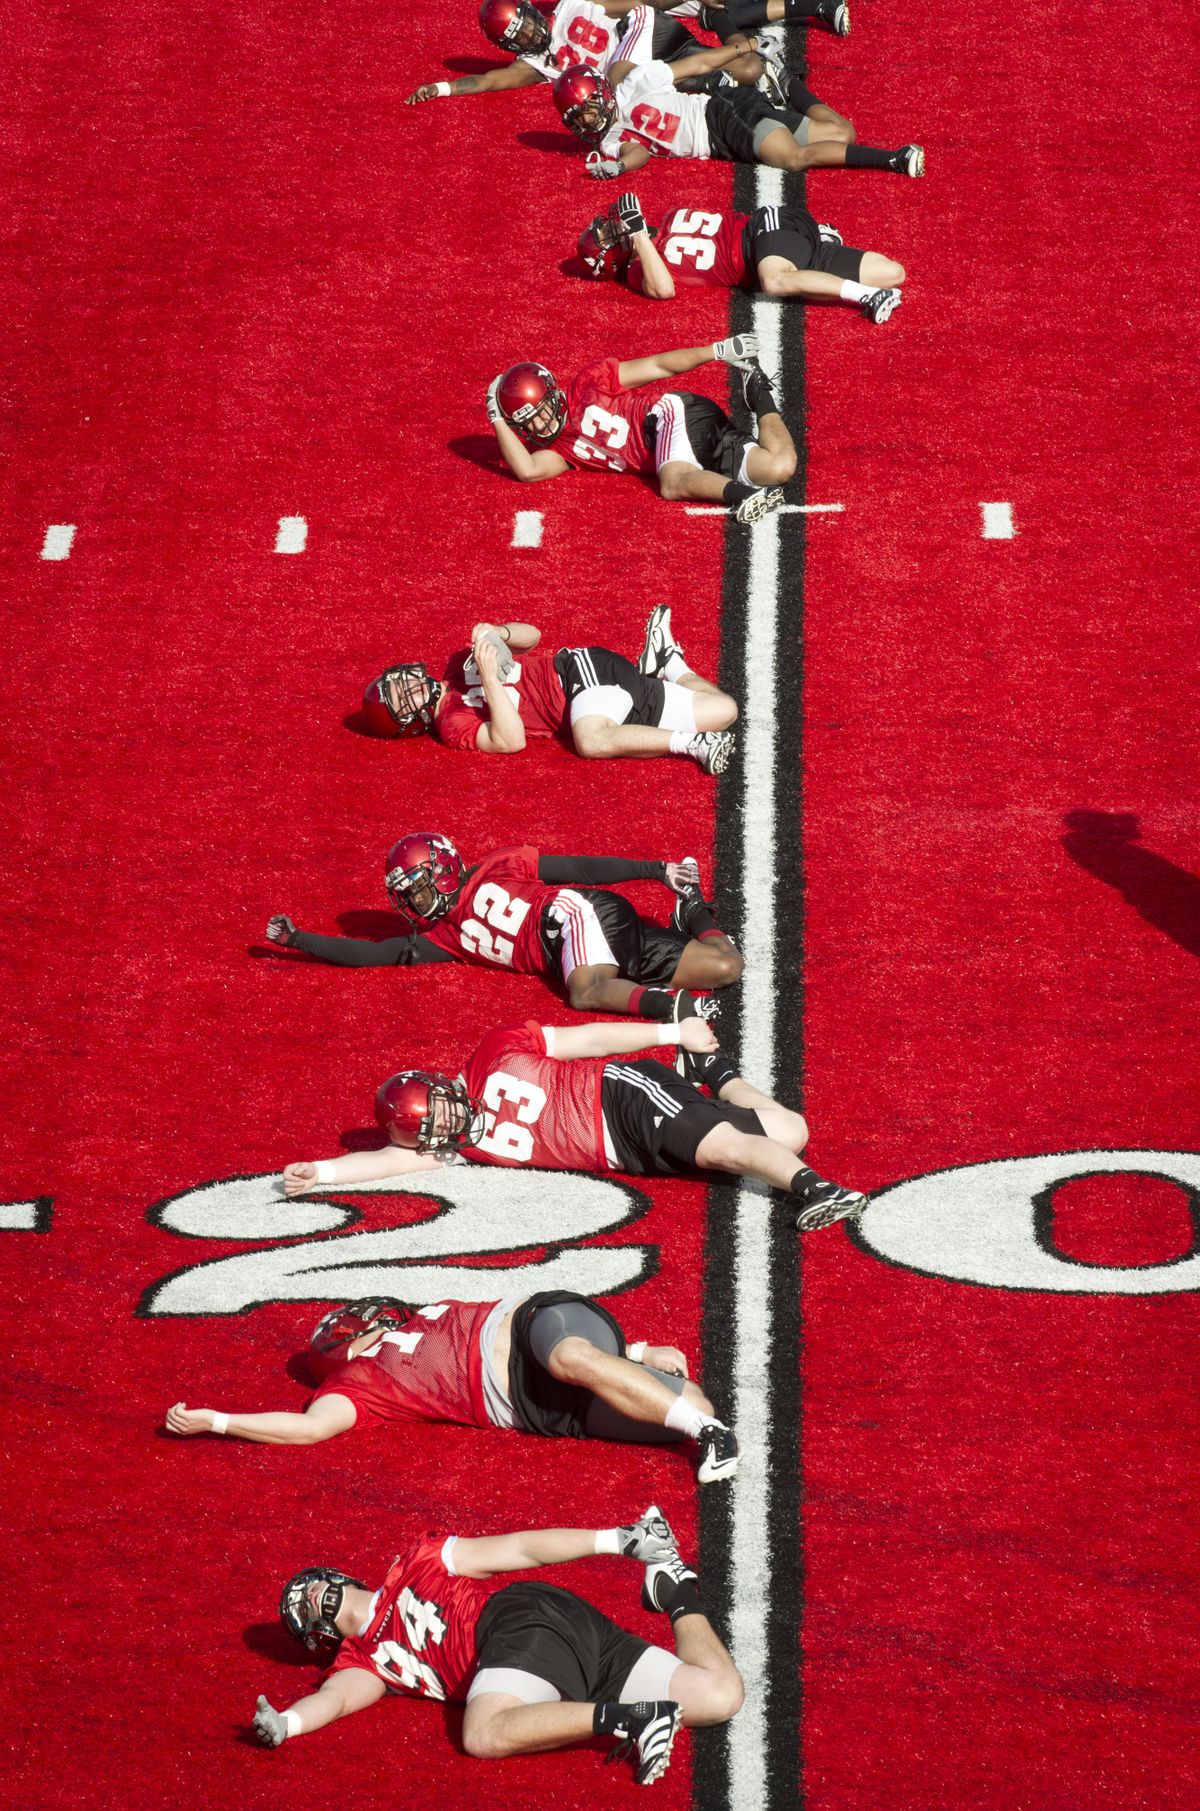 Eastern players stretch out before their first spring practice Tuesday at Roos Field. (Colin Mulvany)